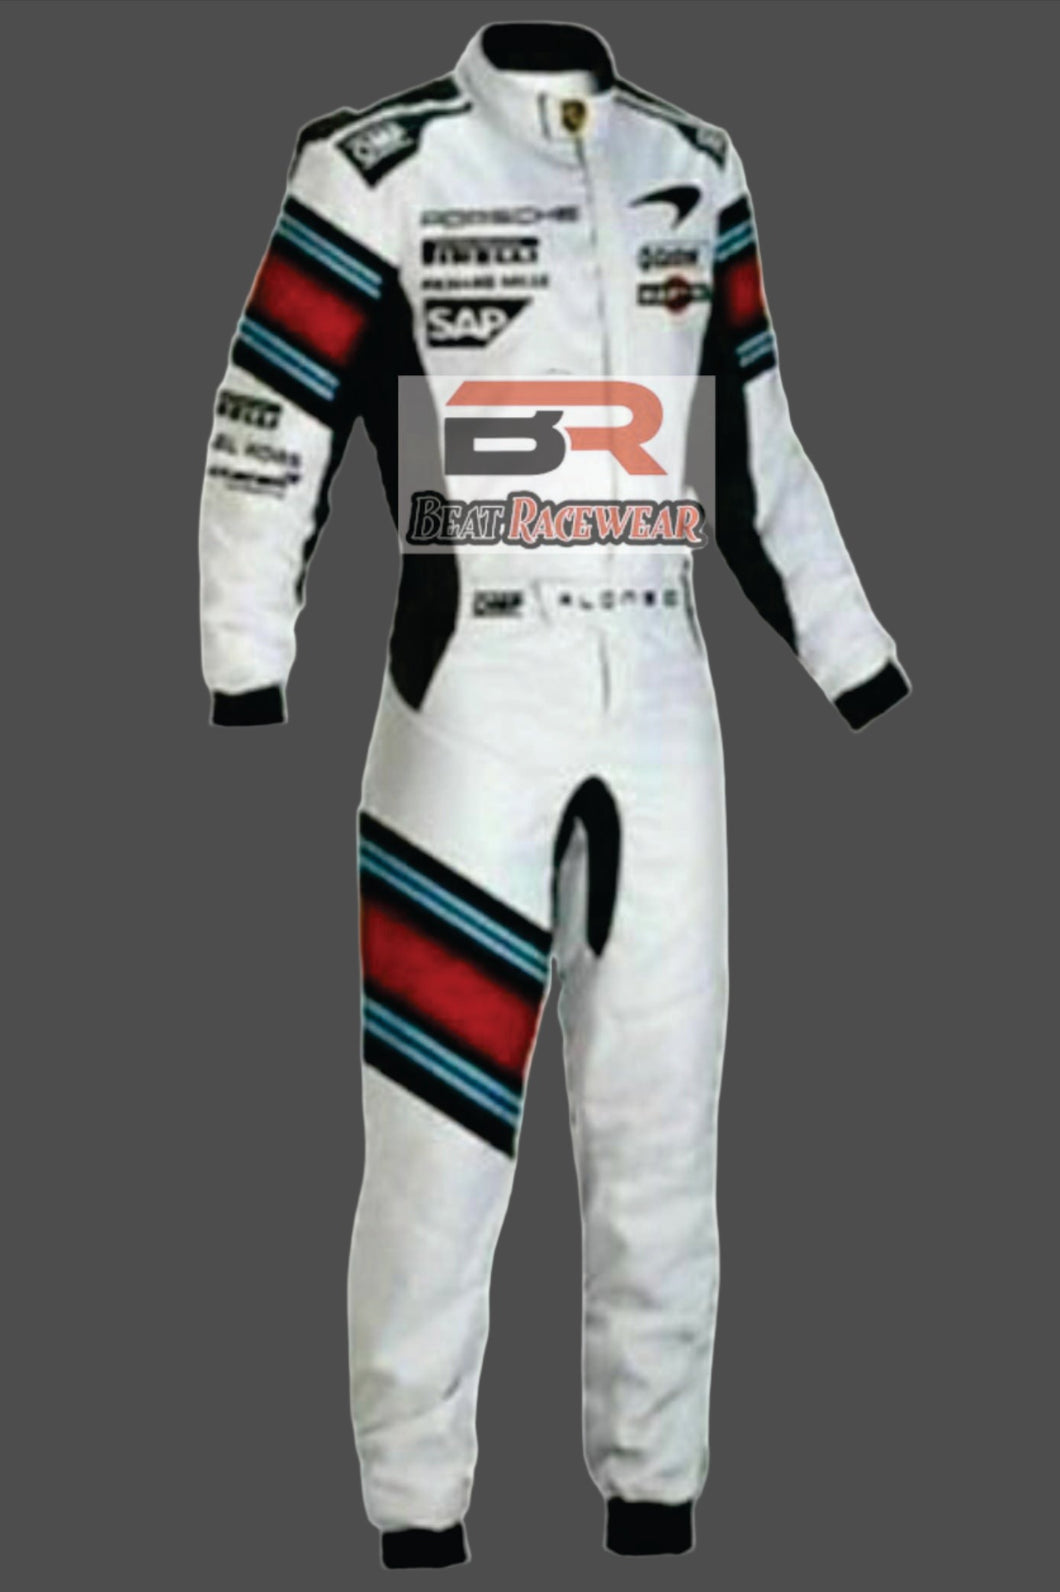 Martini Sublimation Printed go kart race suit,In All Sizes